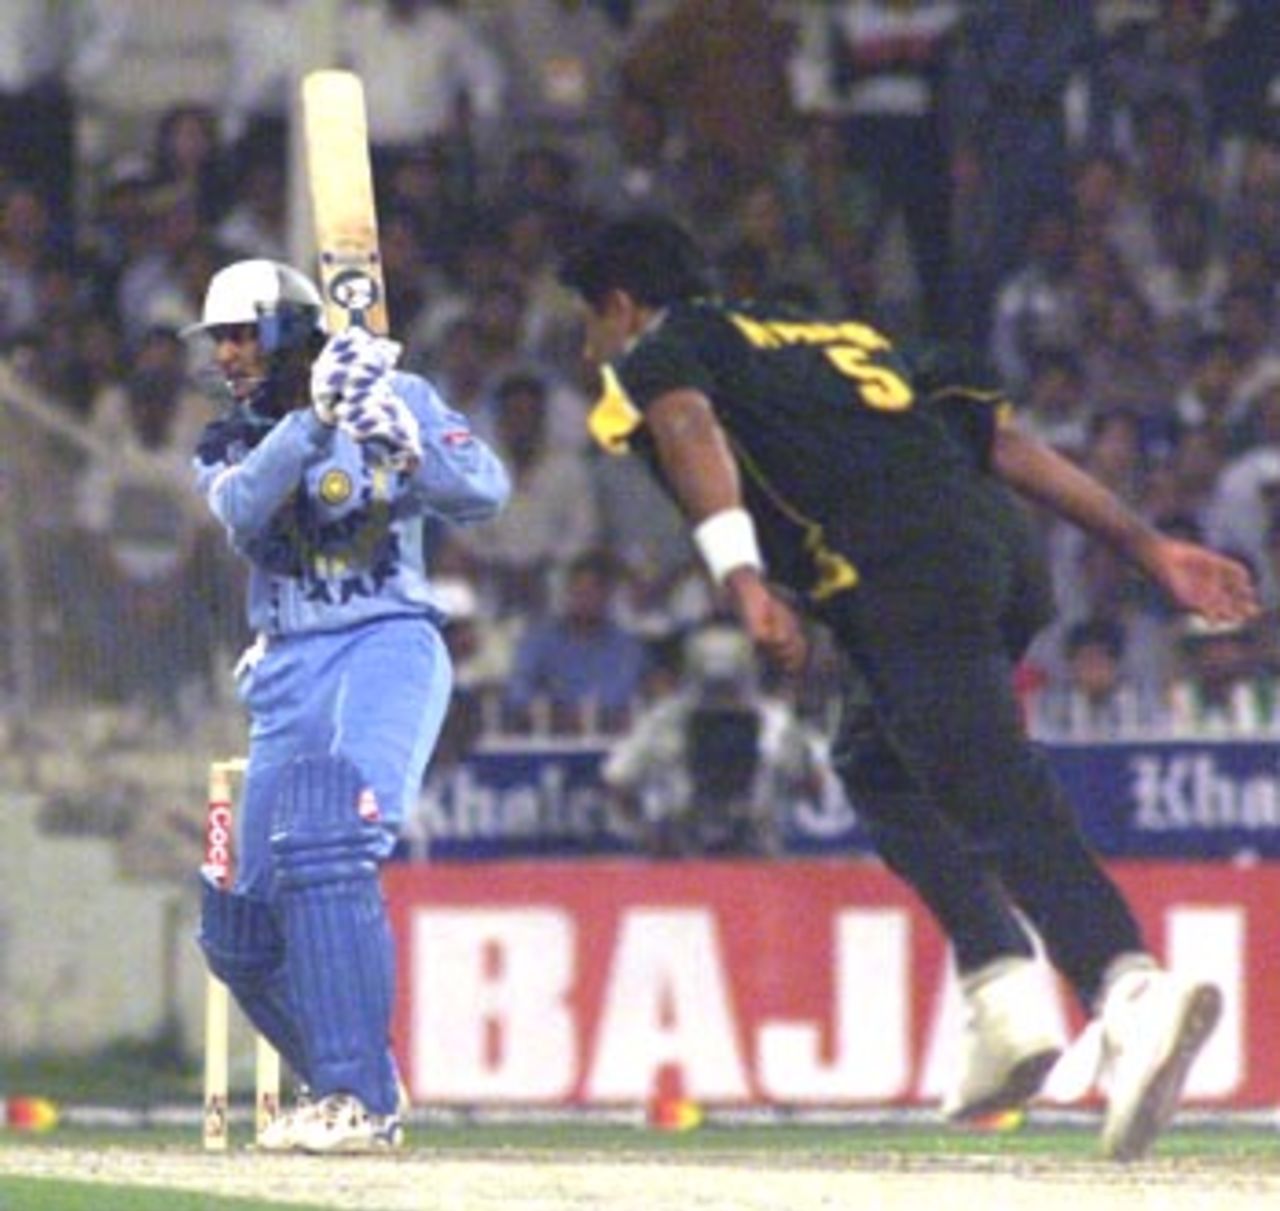 Azhar plays a wristy square drive of Waqar Younis, India v Pakistan, Coca-Cola Cup, 1999/00, Sharjah C.A. Stadium, 23 March 2000